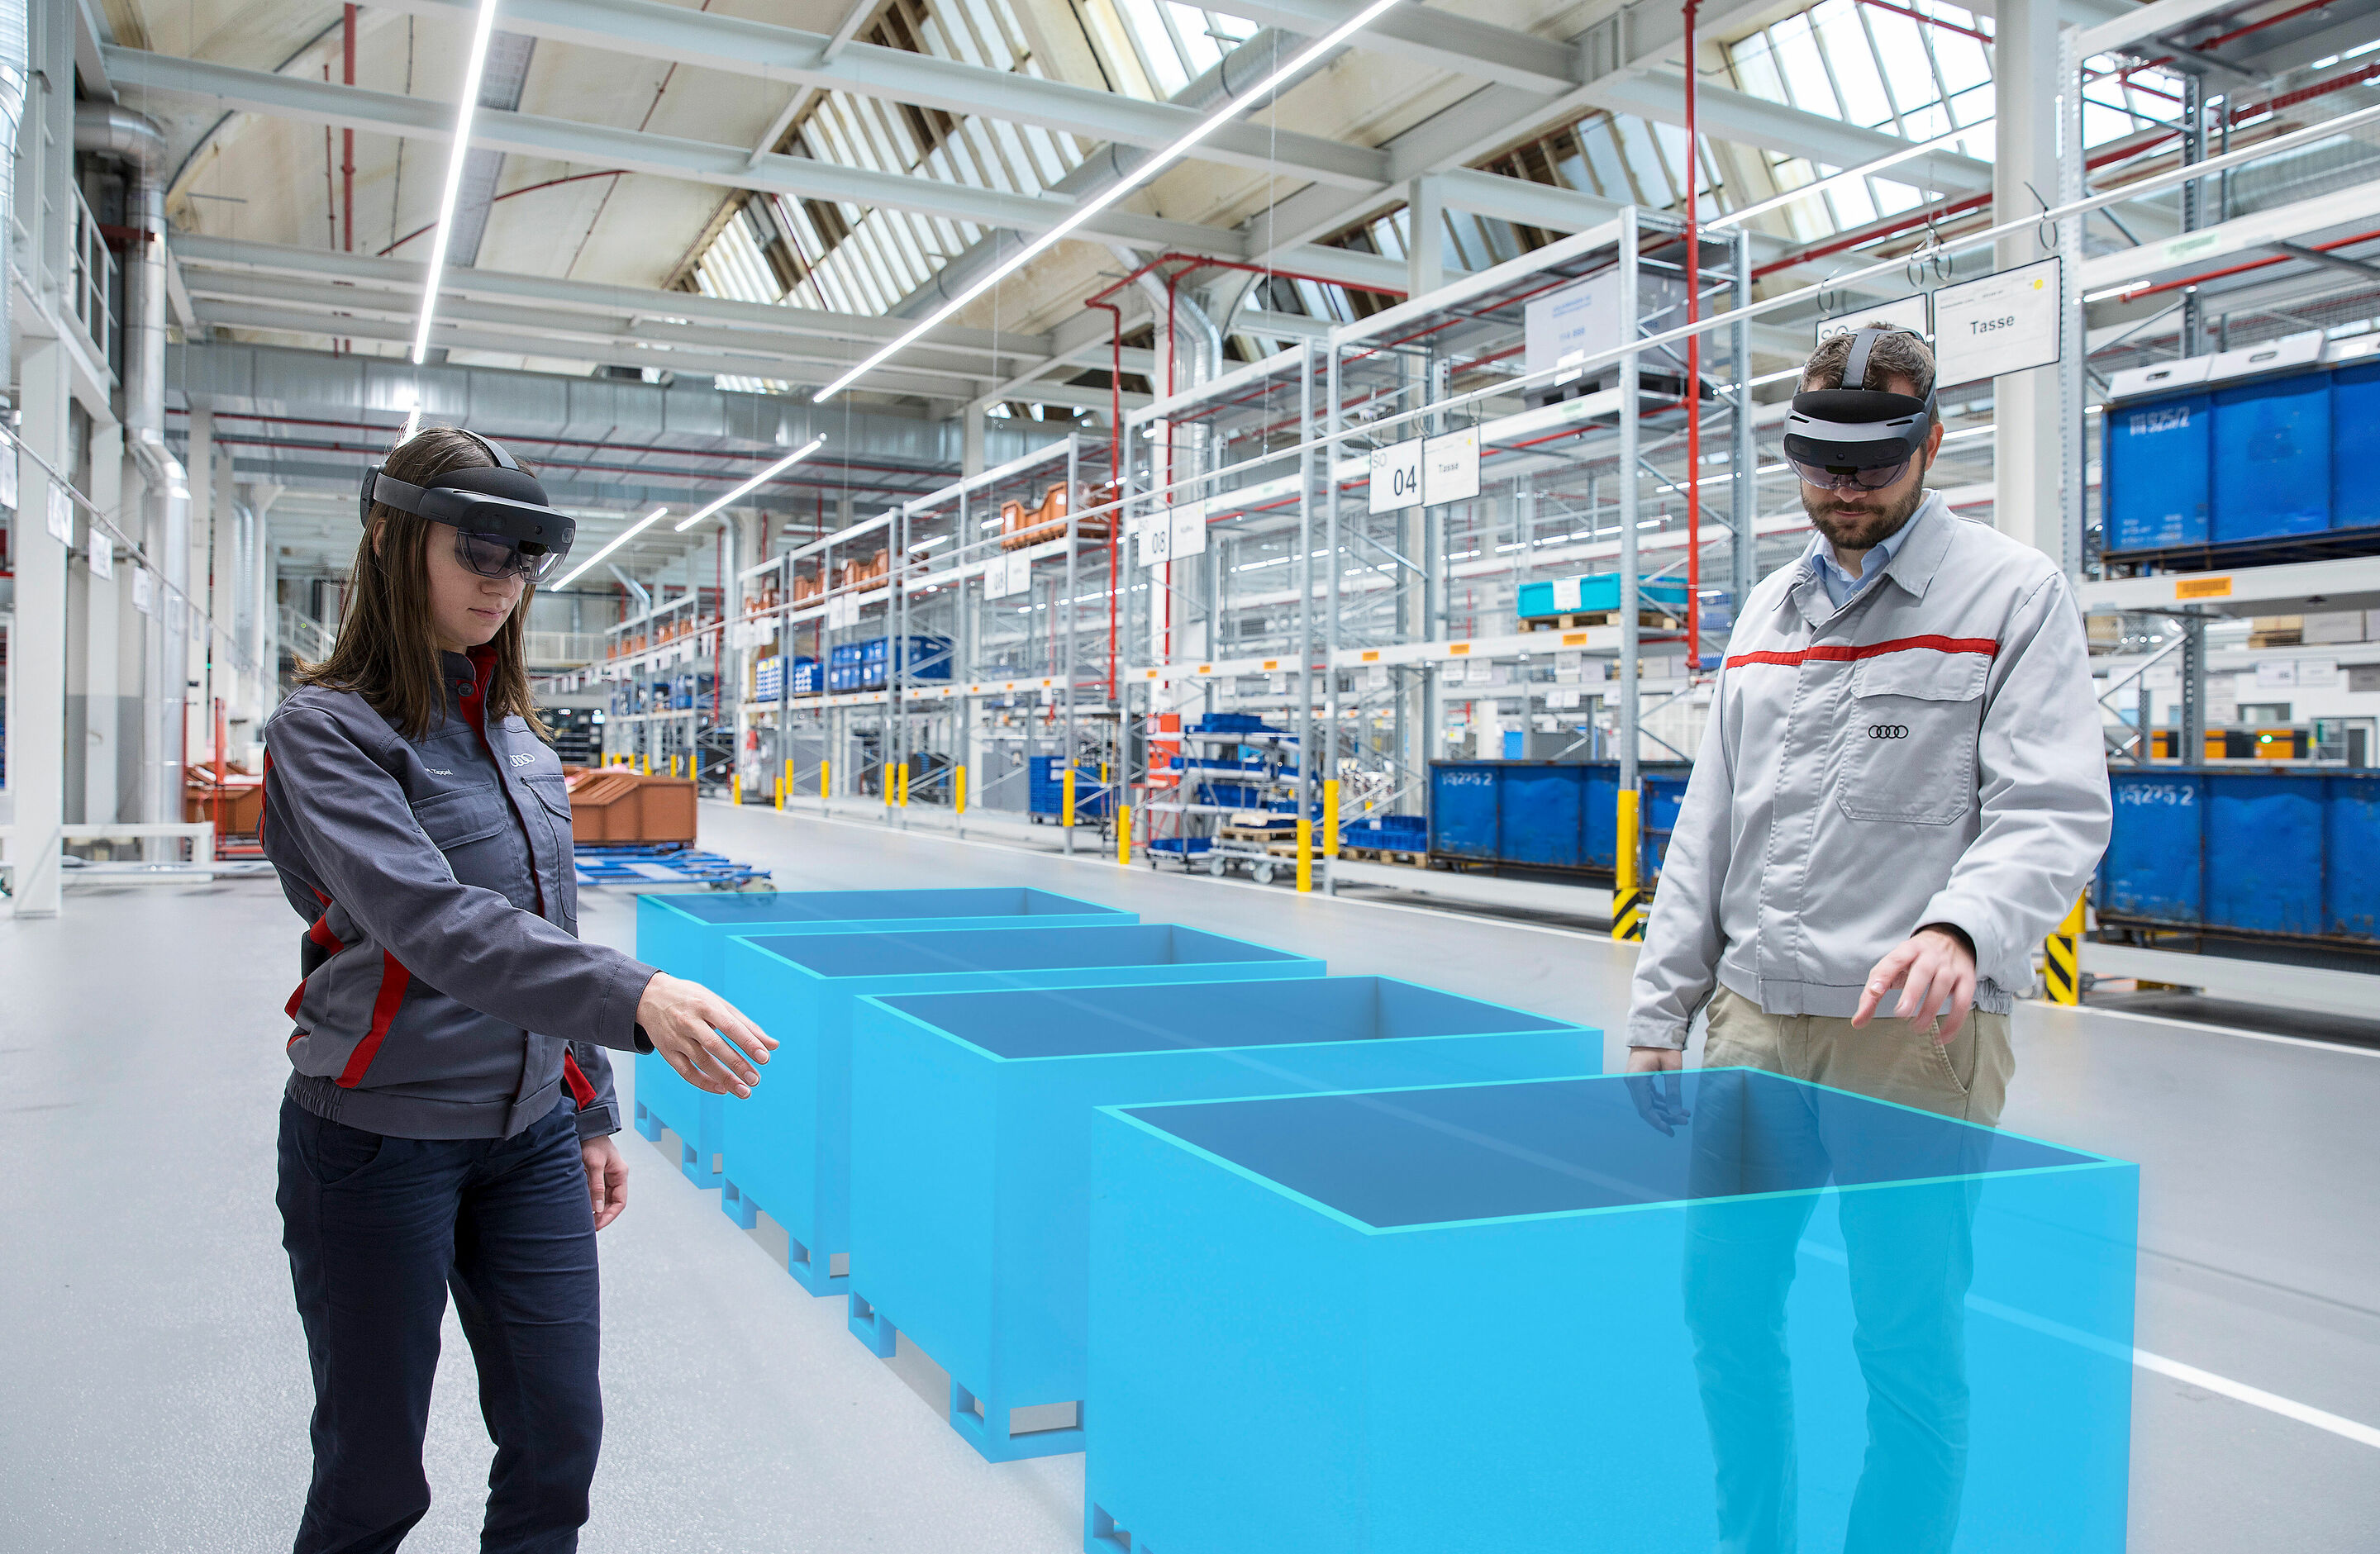 Audi is using augmented reality to increase efficiency in logistics planning